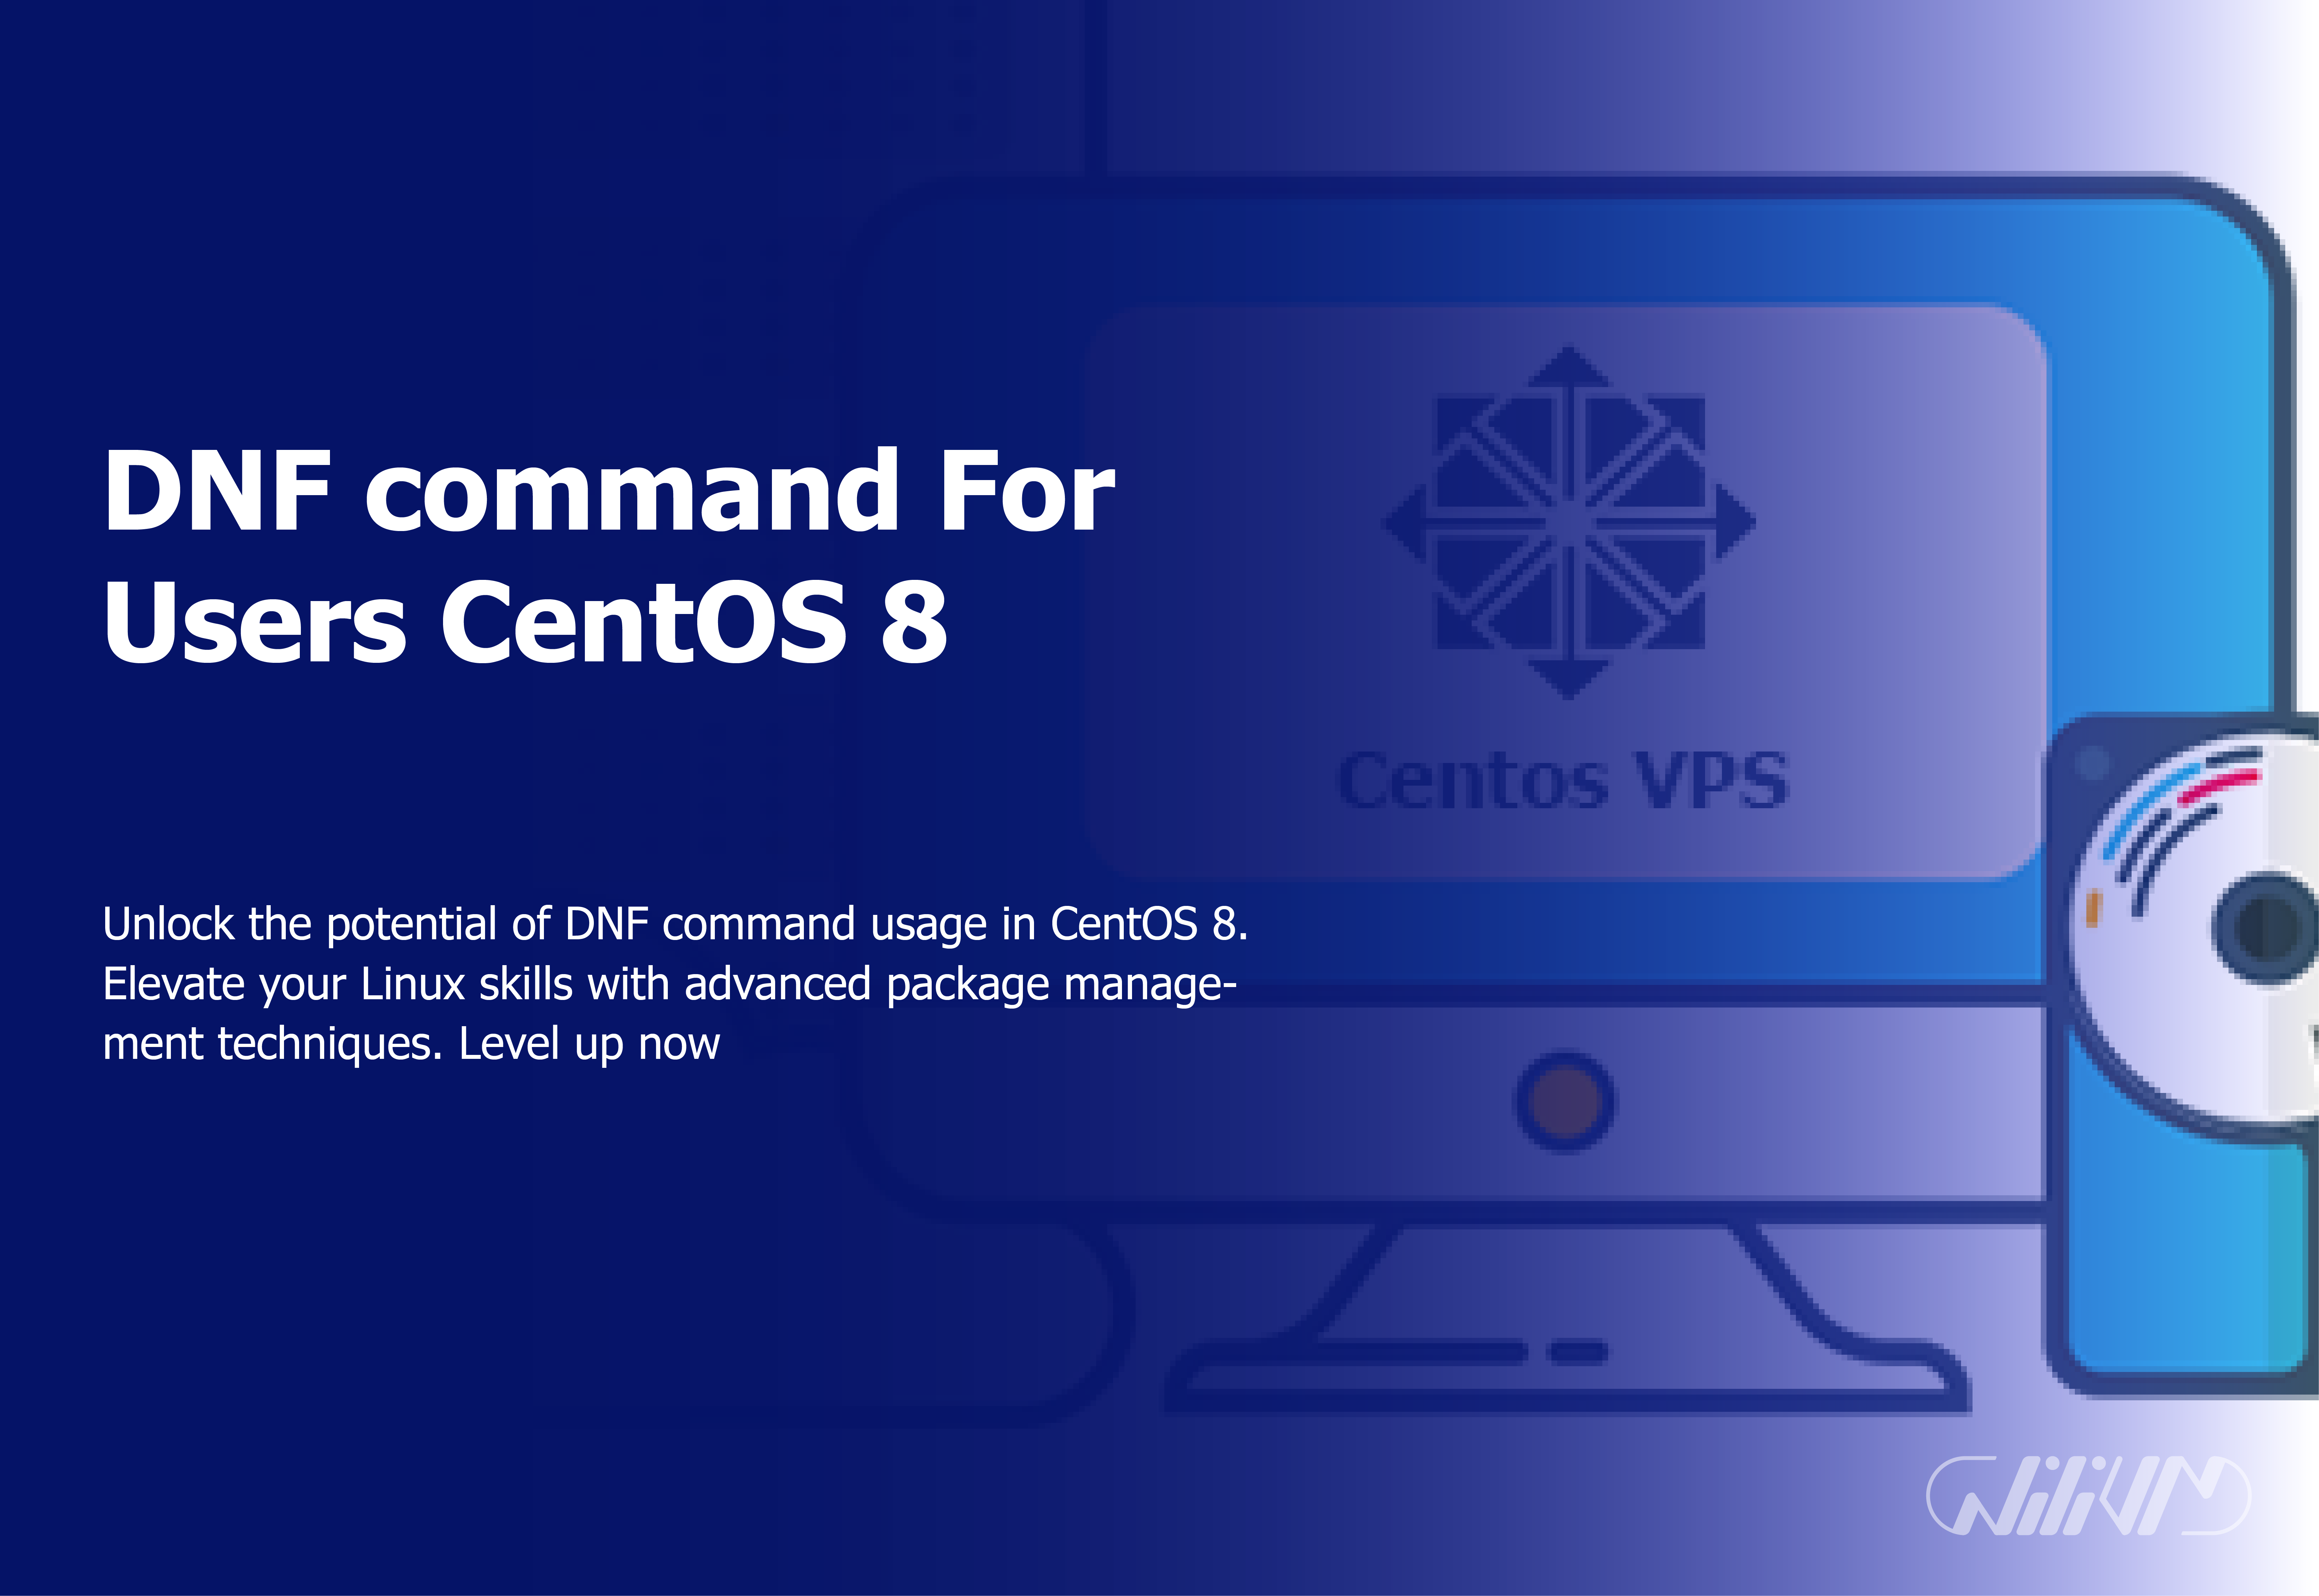 DNF command For Users CentOS 8